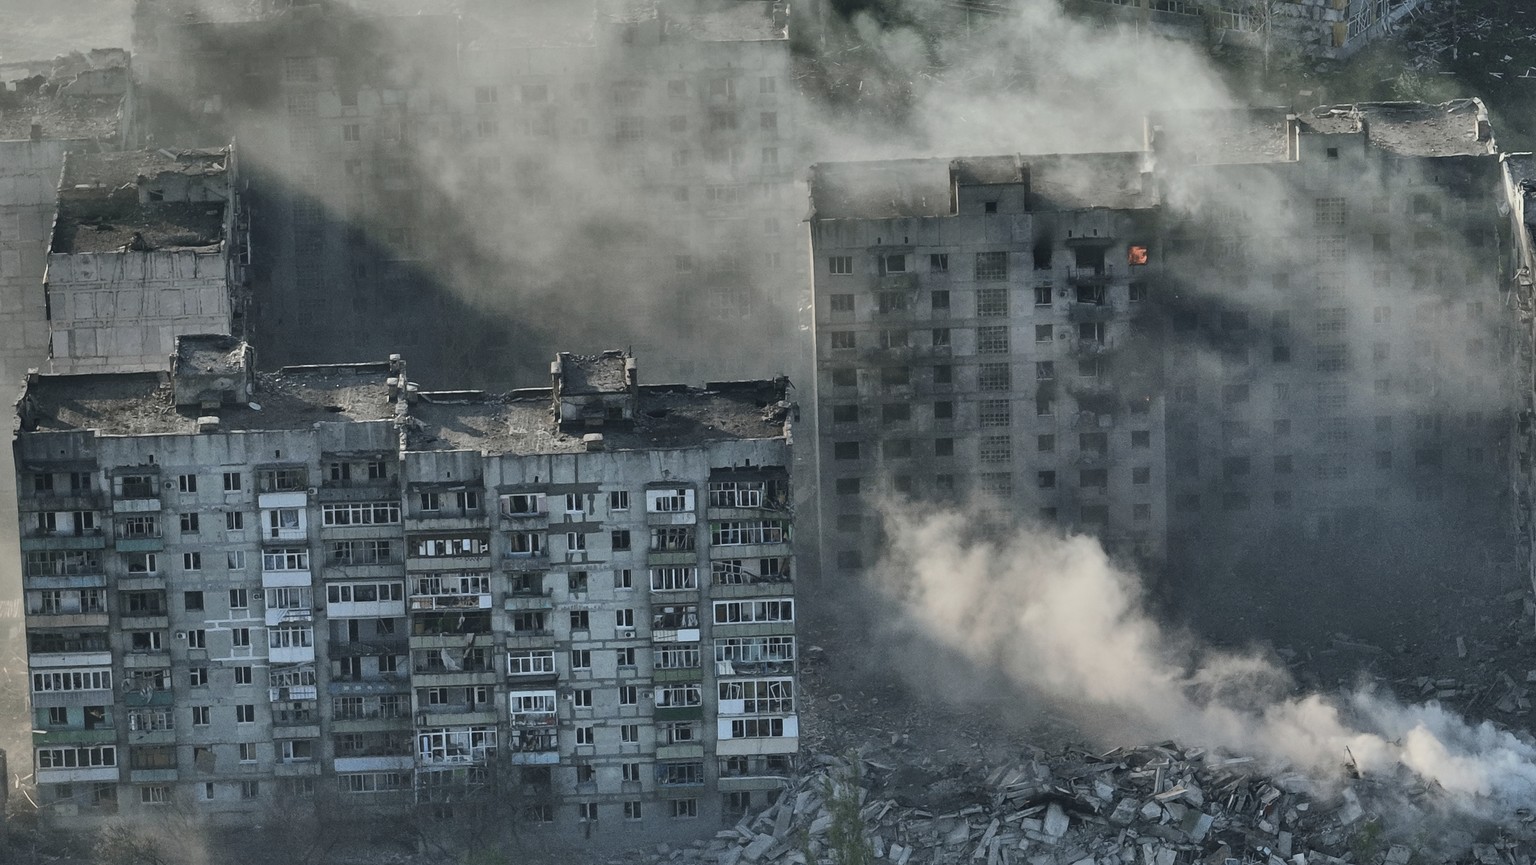 Smoke rises from buildings in this aerial view of Bakhmut, in the Donetsk region, Ukraine, Wednesday, April 26, 2023. (AP Photo/Libkos)